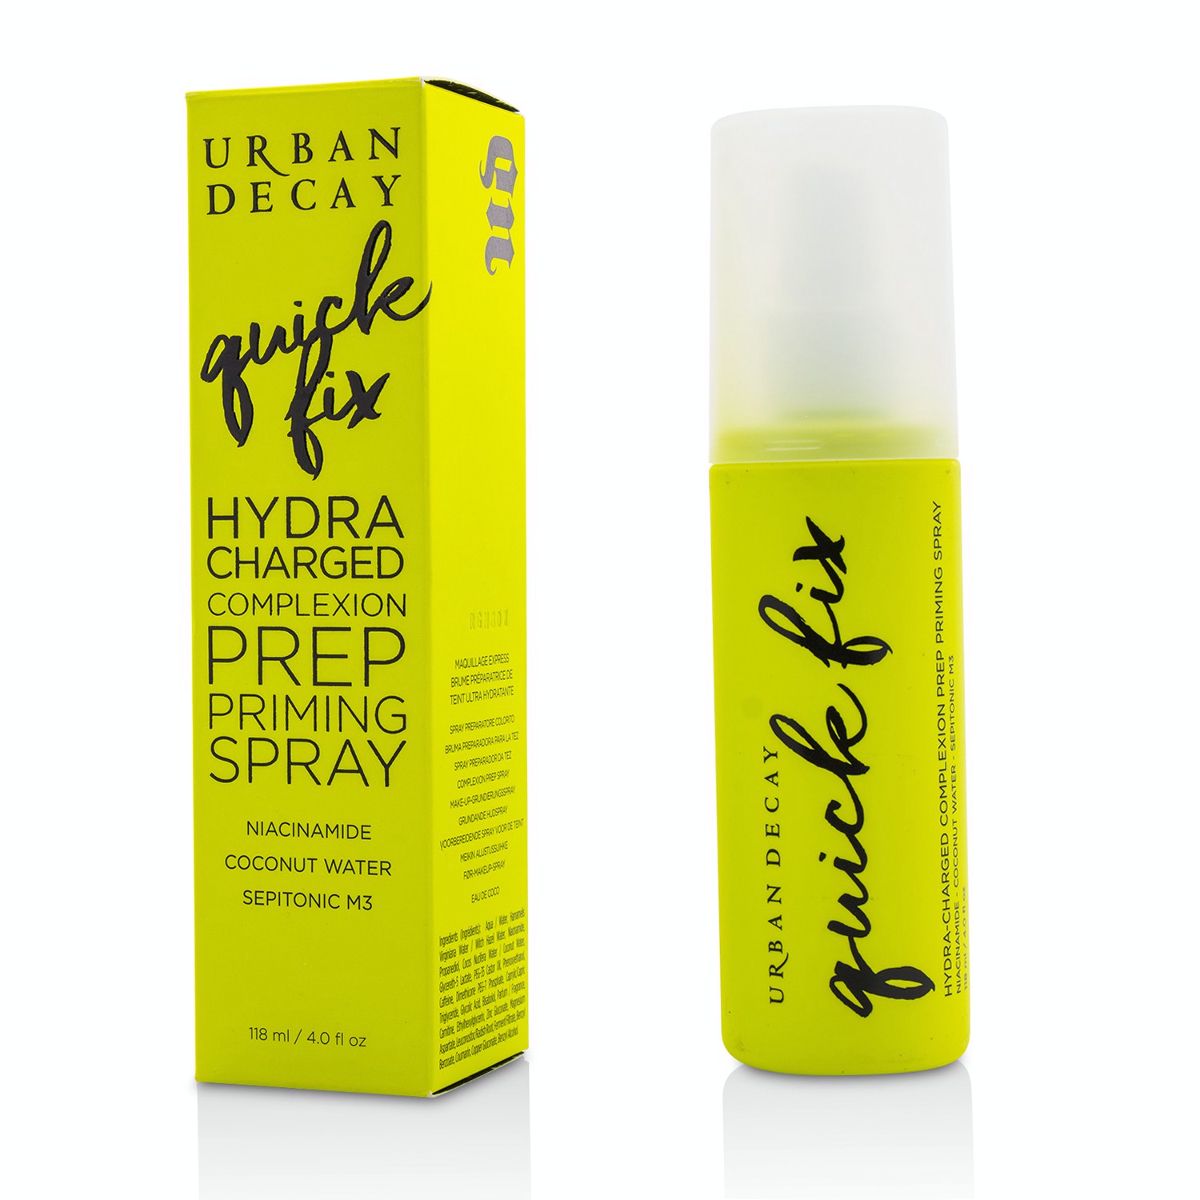 Quick Fix Hydra Charged Complexion Prep Priming Spray Urban Decay Image